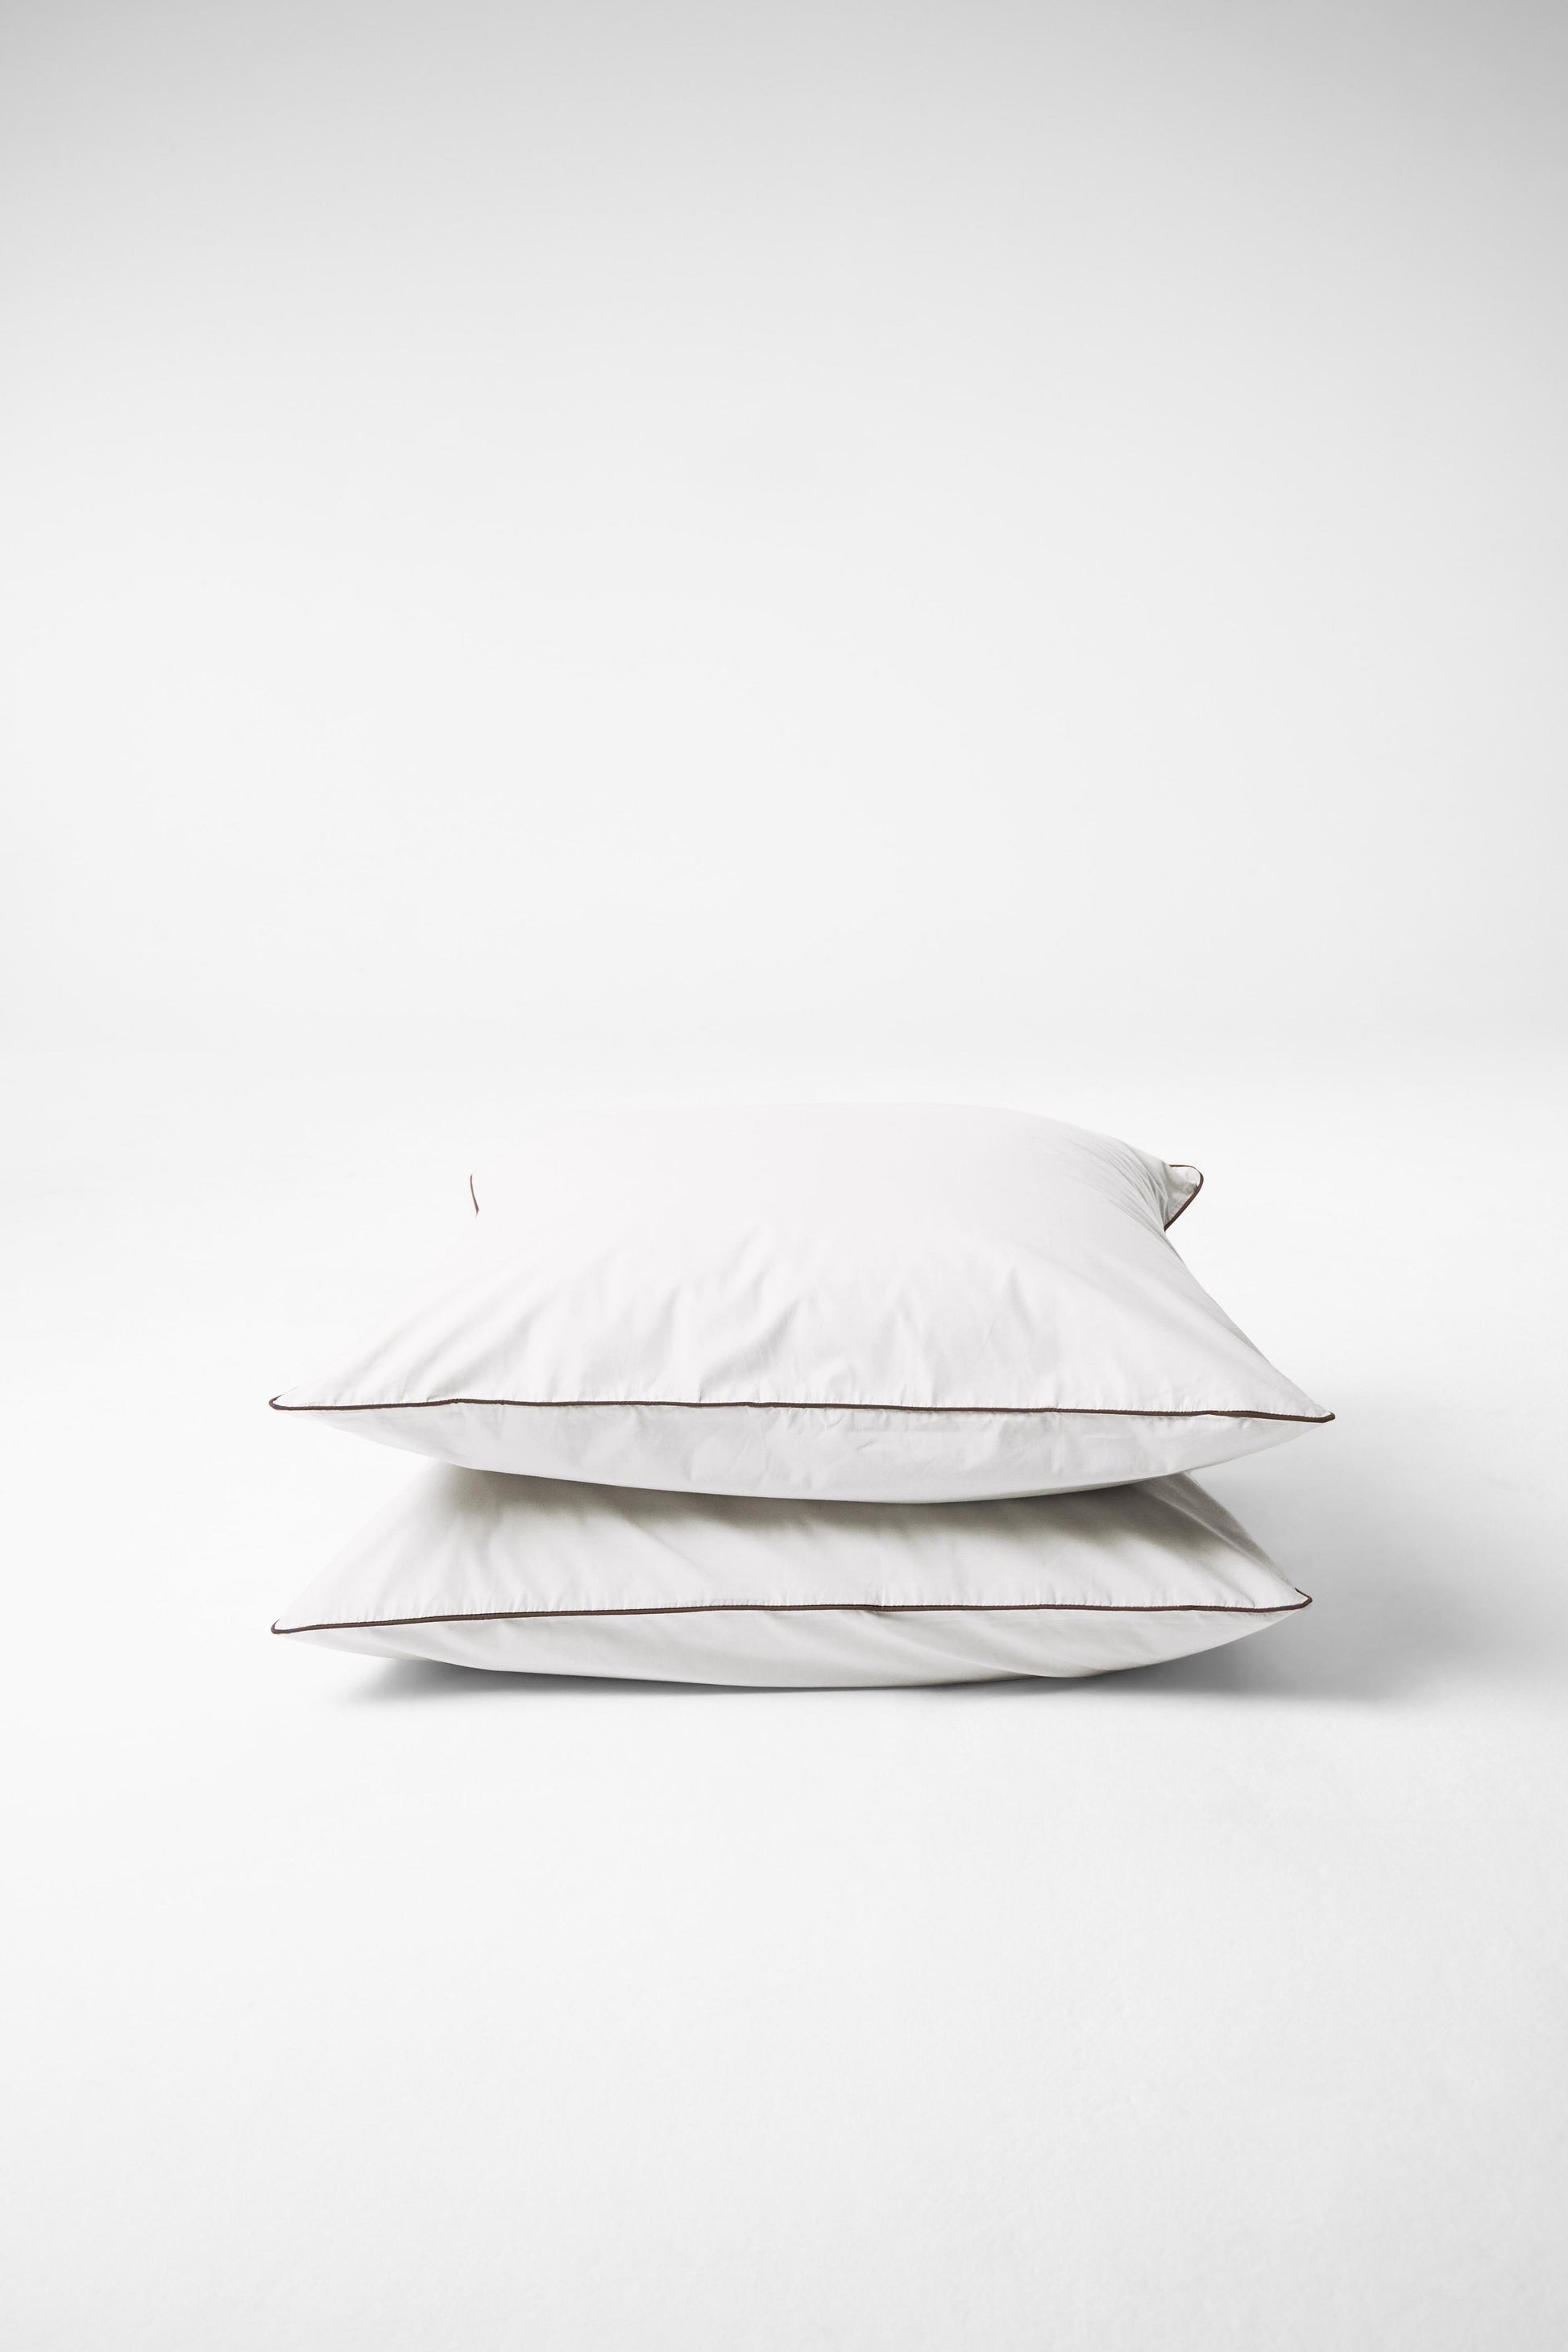 Contrast Edge Organic Cotton Percale Pillow Pair - Prism with Carob Pillows in Euro Pillow